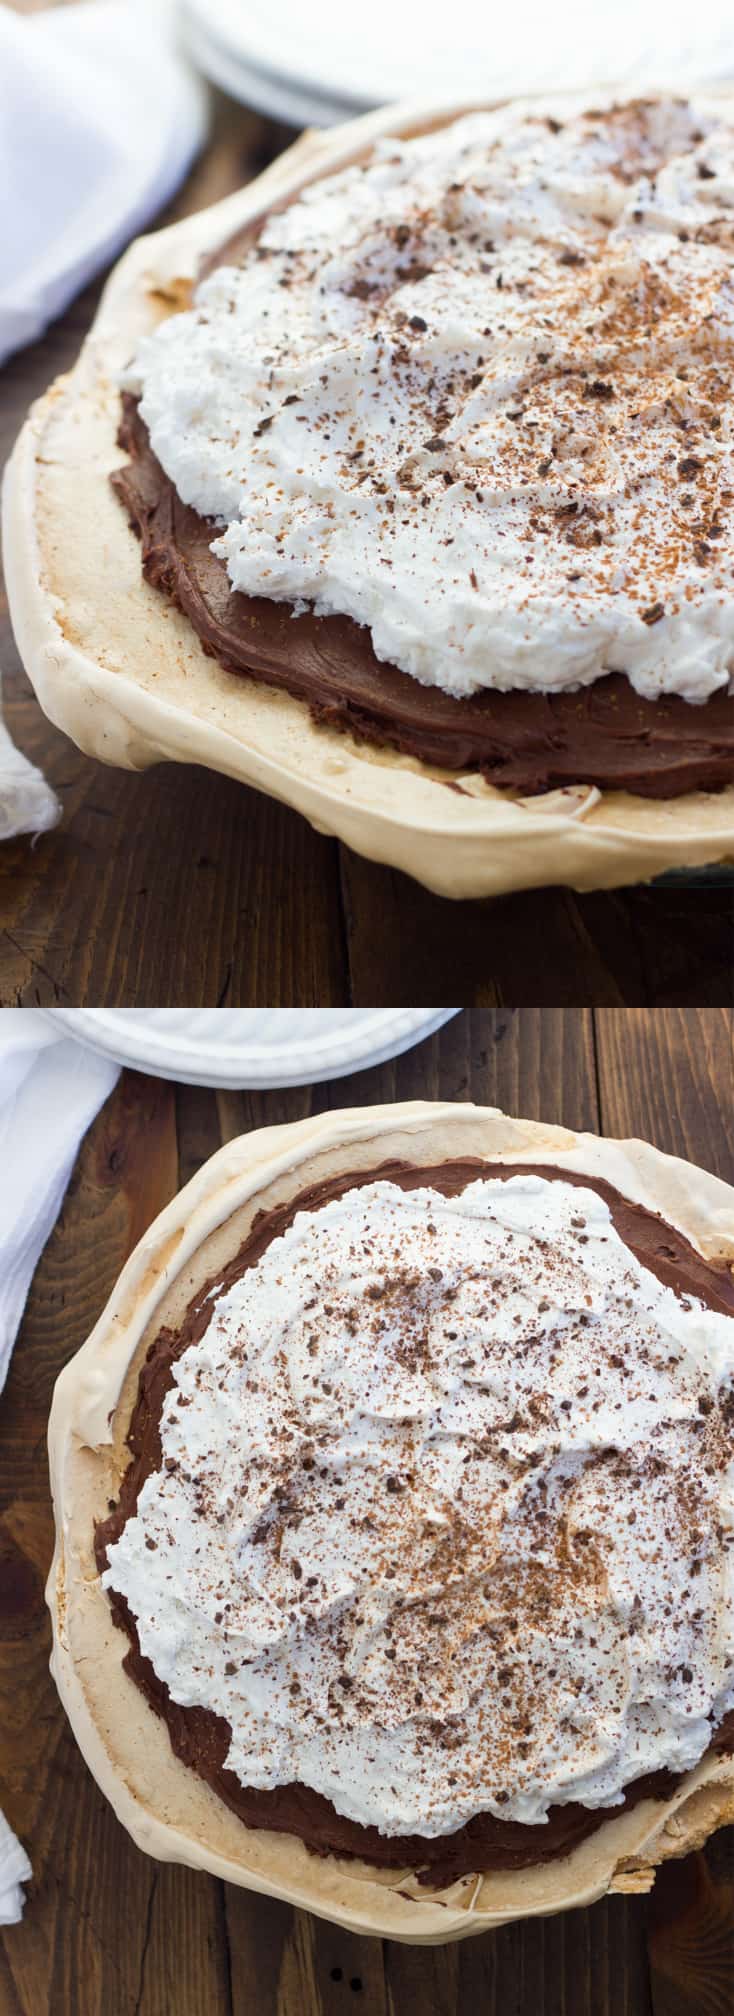 Chocolate Angel Pie! A crisp meringue crust filled with chocolate-truffle-like filling, then topped with pillowy whipped cream. Gluten-free, dairy-free and made with pantry ingredients.